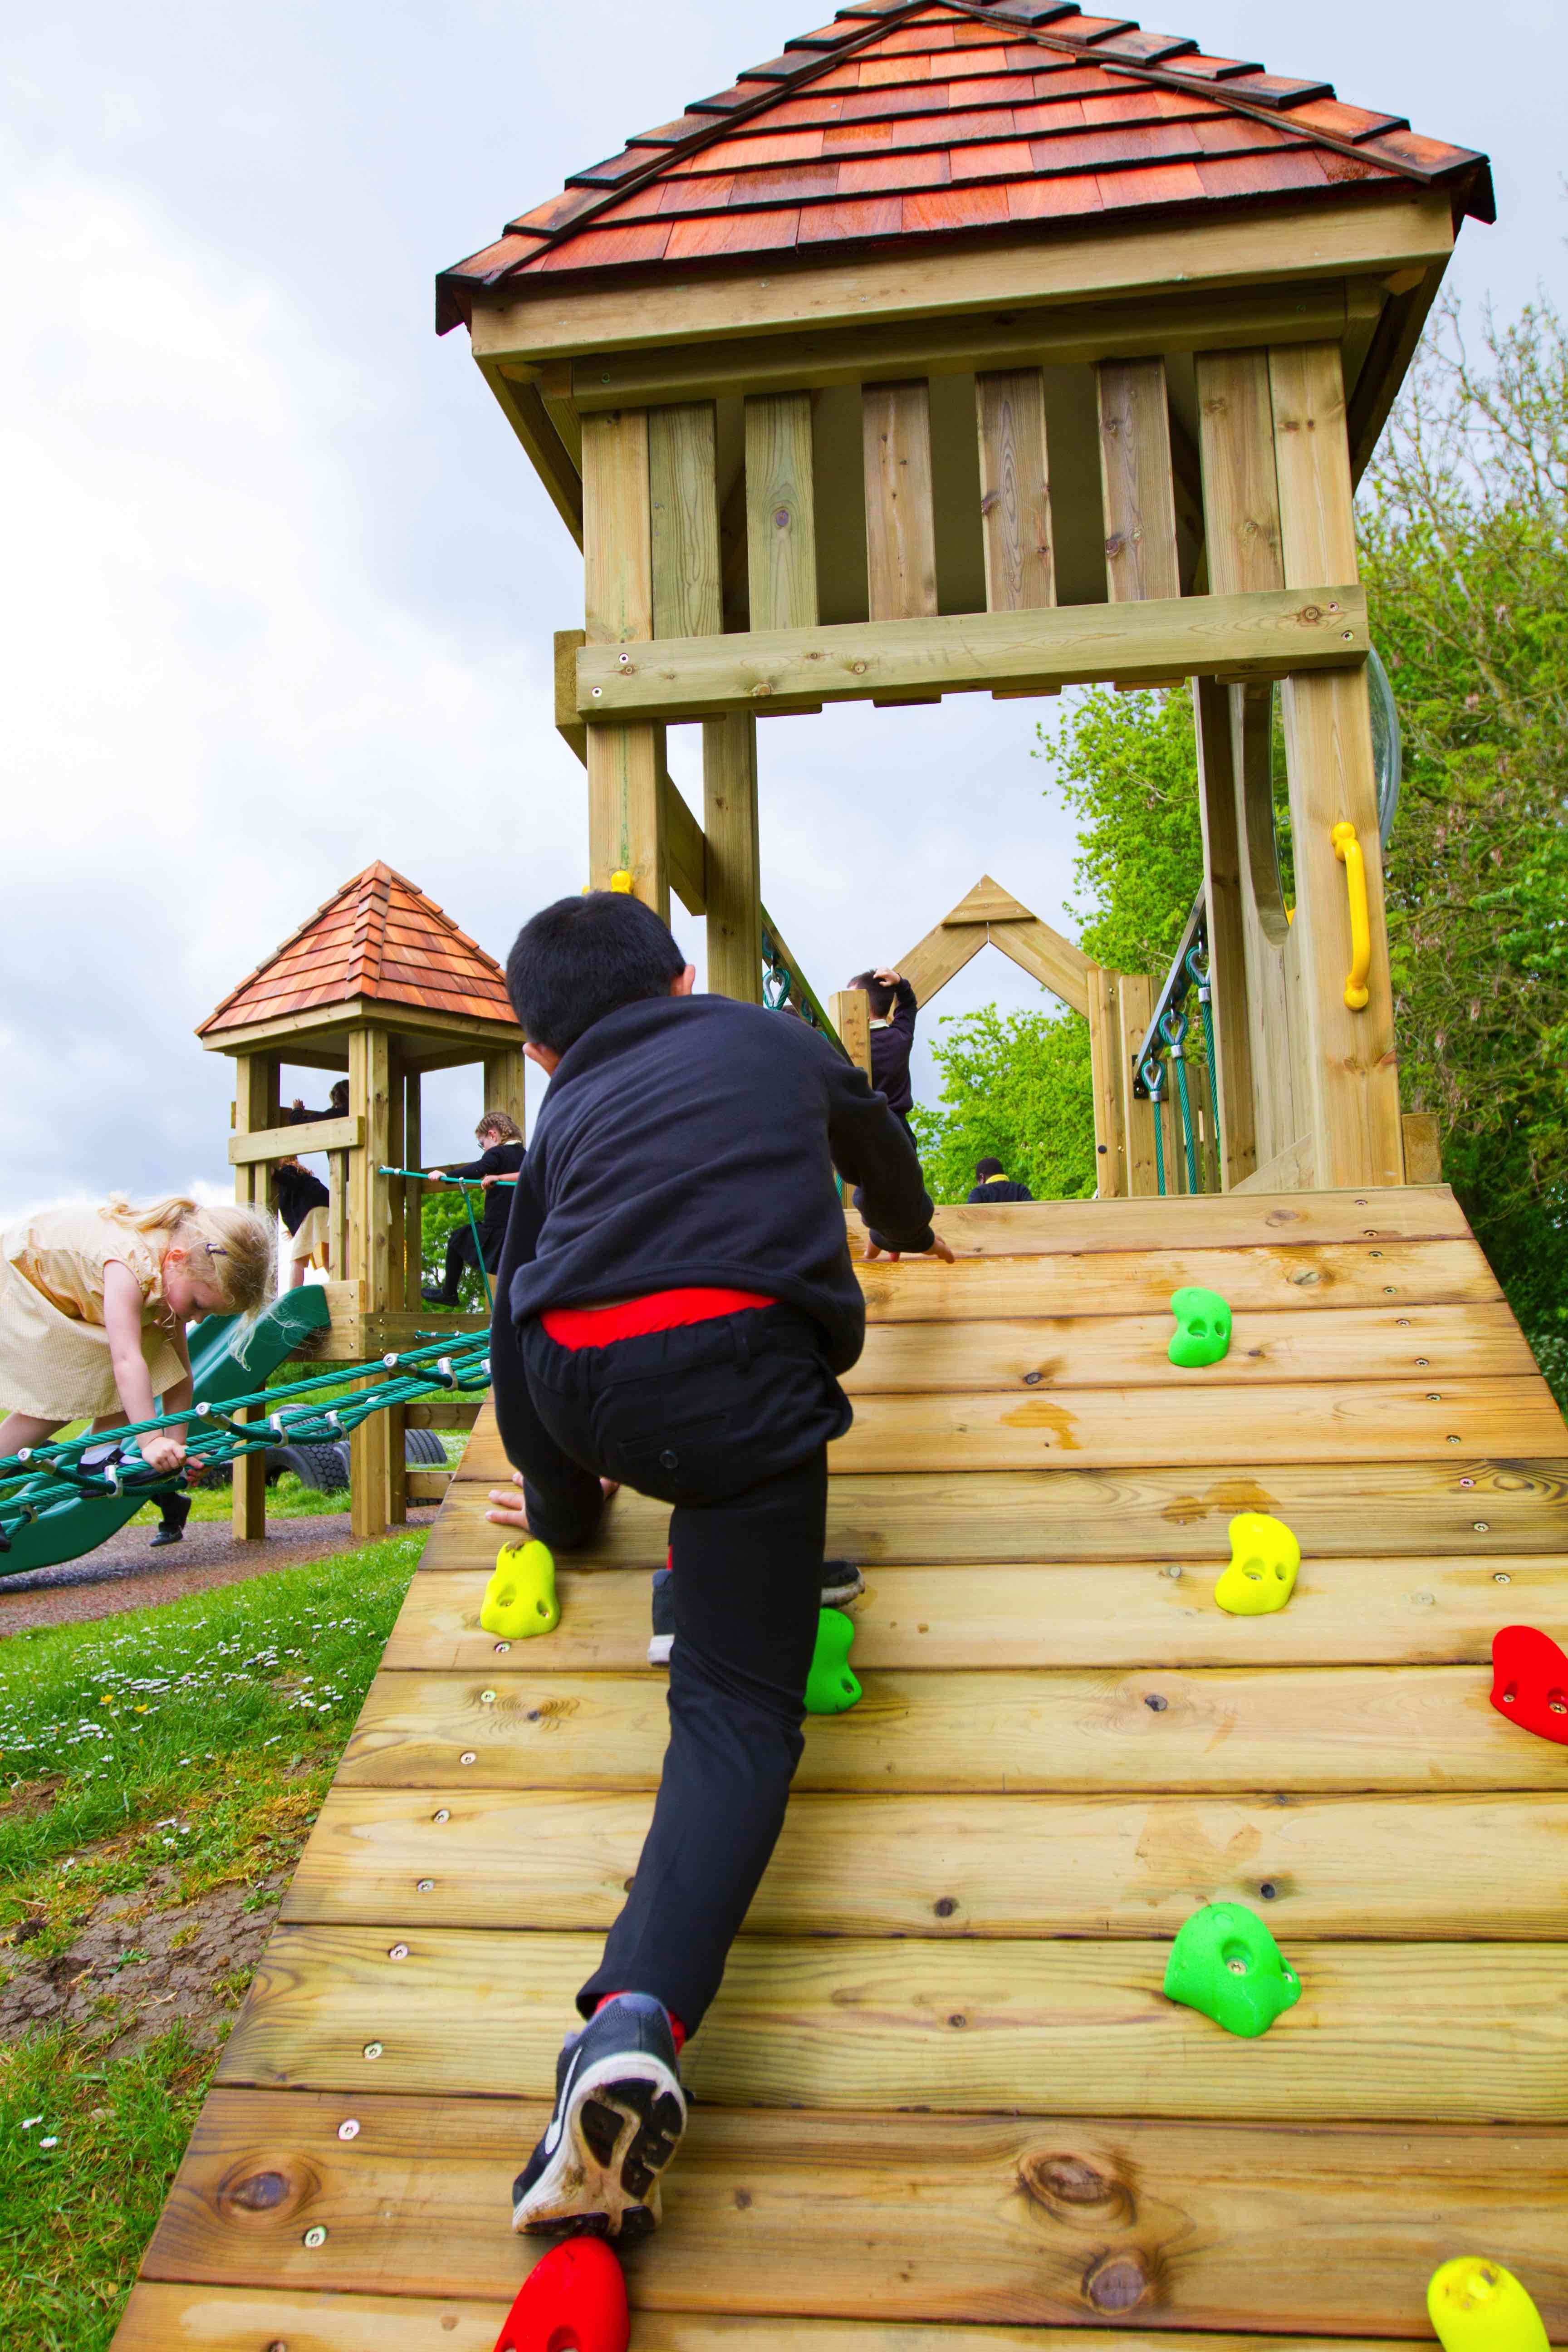 Every childs play area needs the wooden ramp climber !